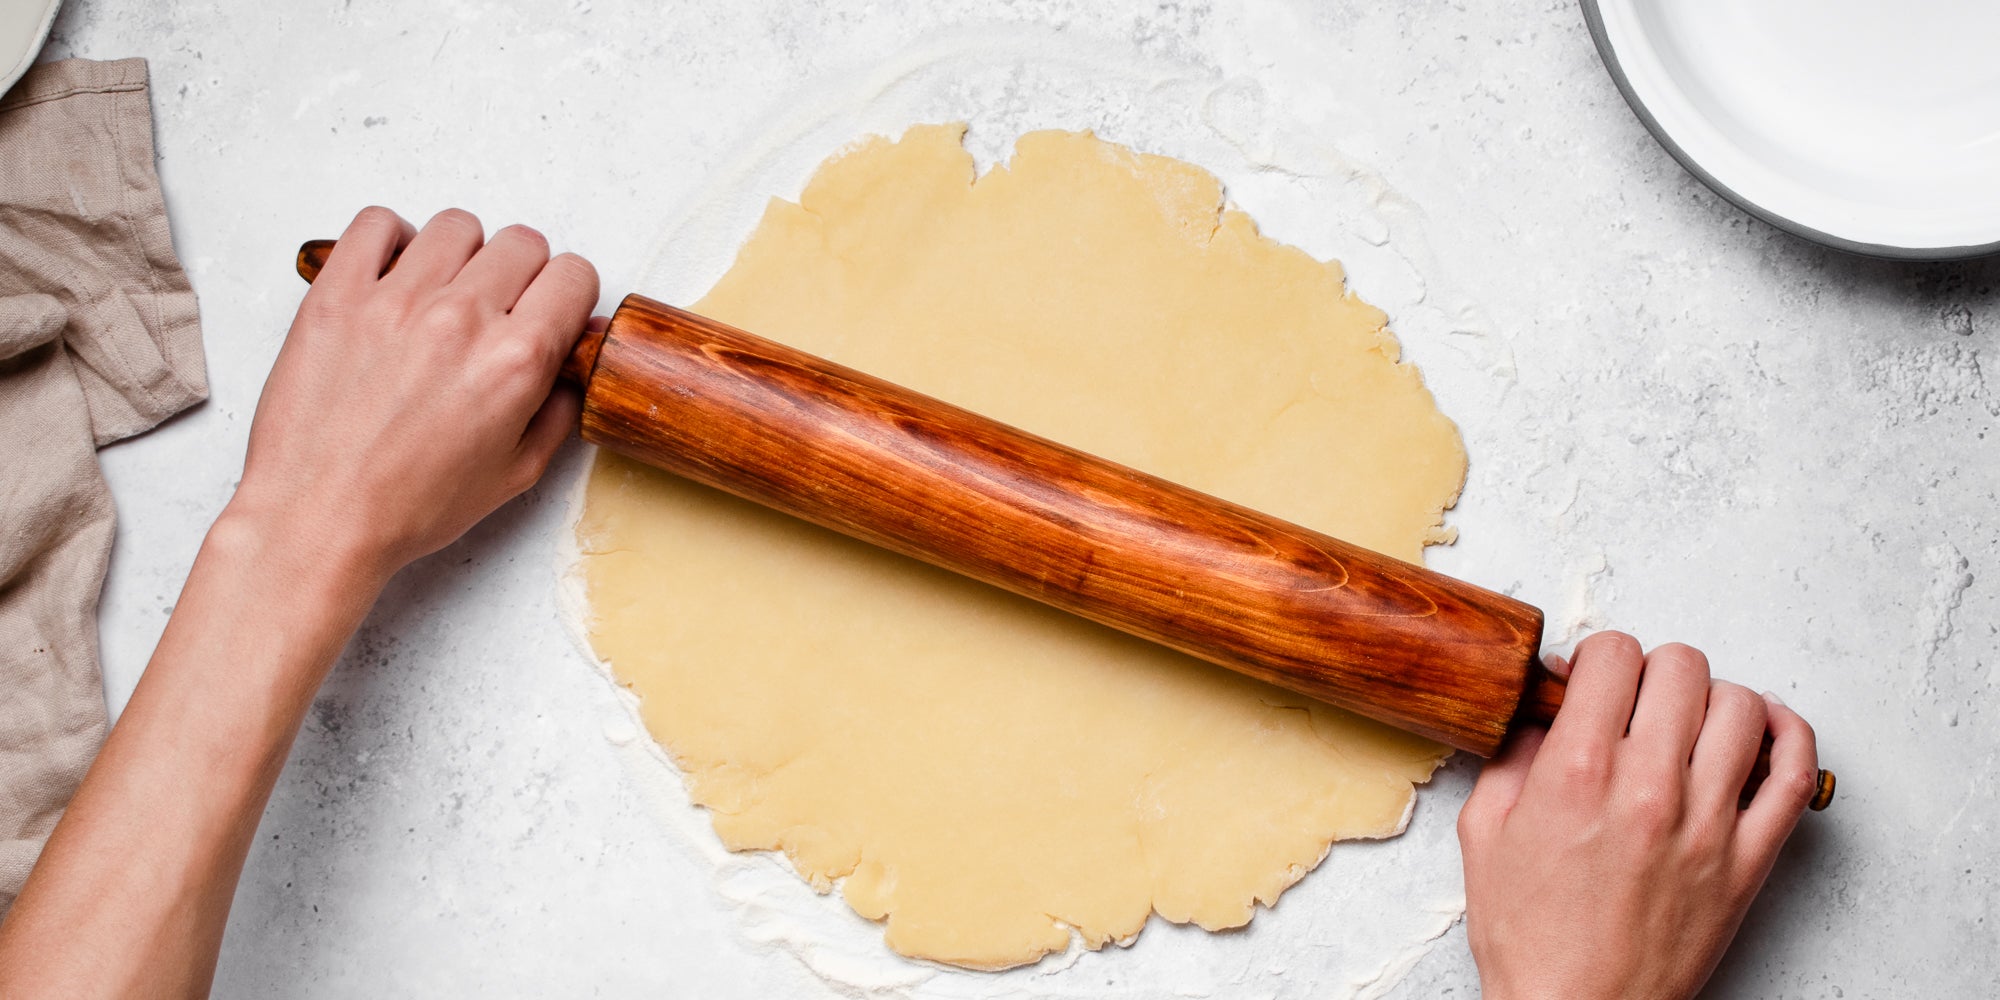 Shortcrust pastry being rolled out onto a floured surface